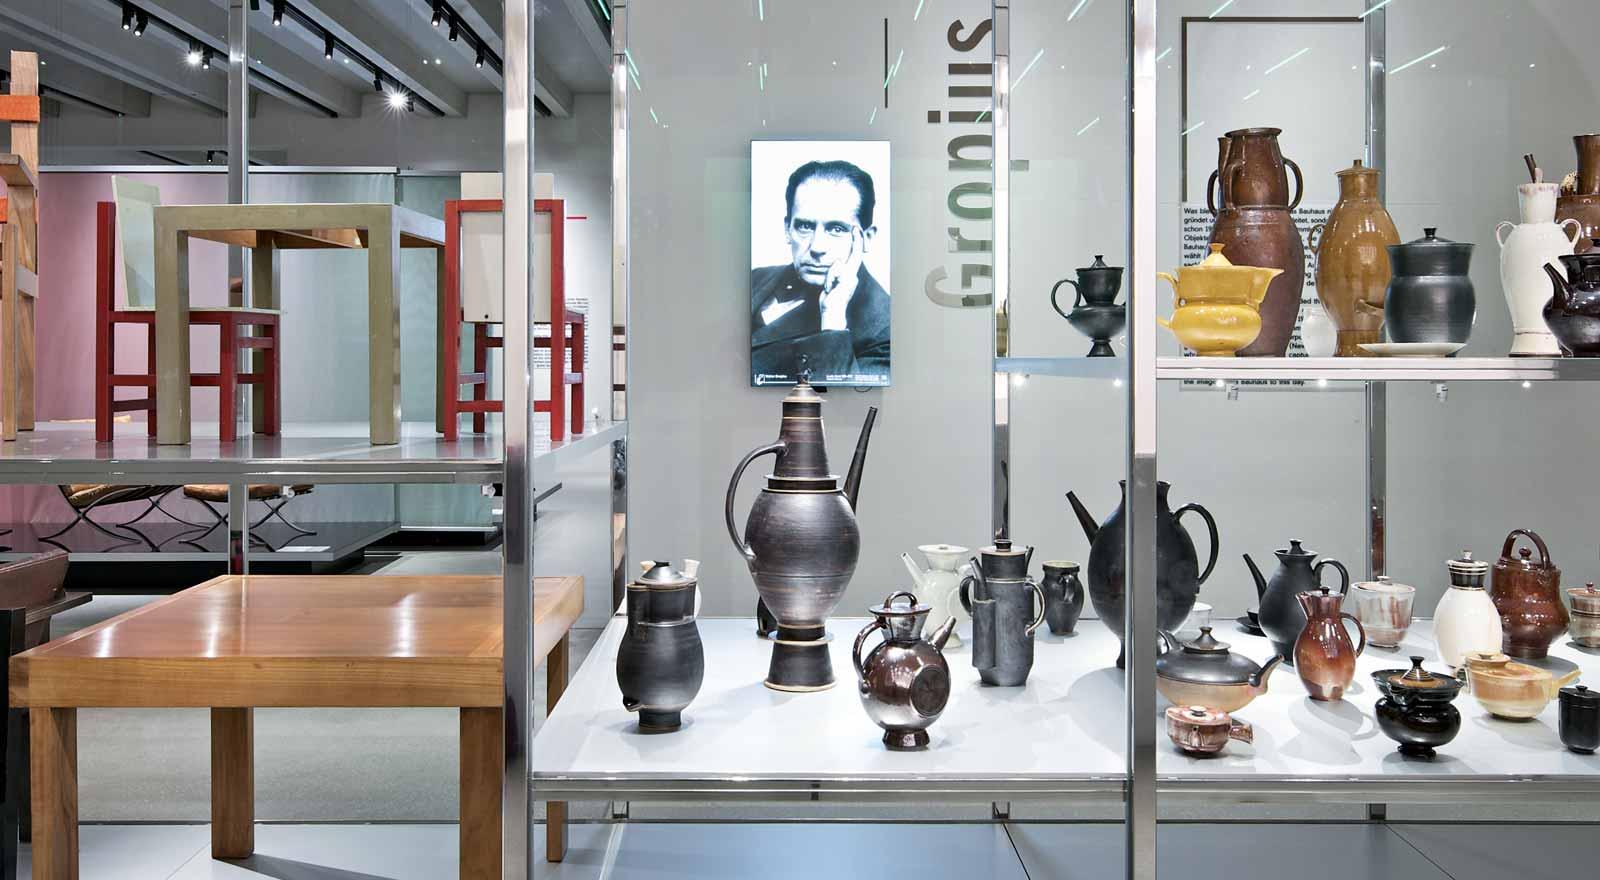 The Walter Gropius Collection